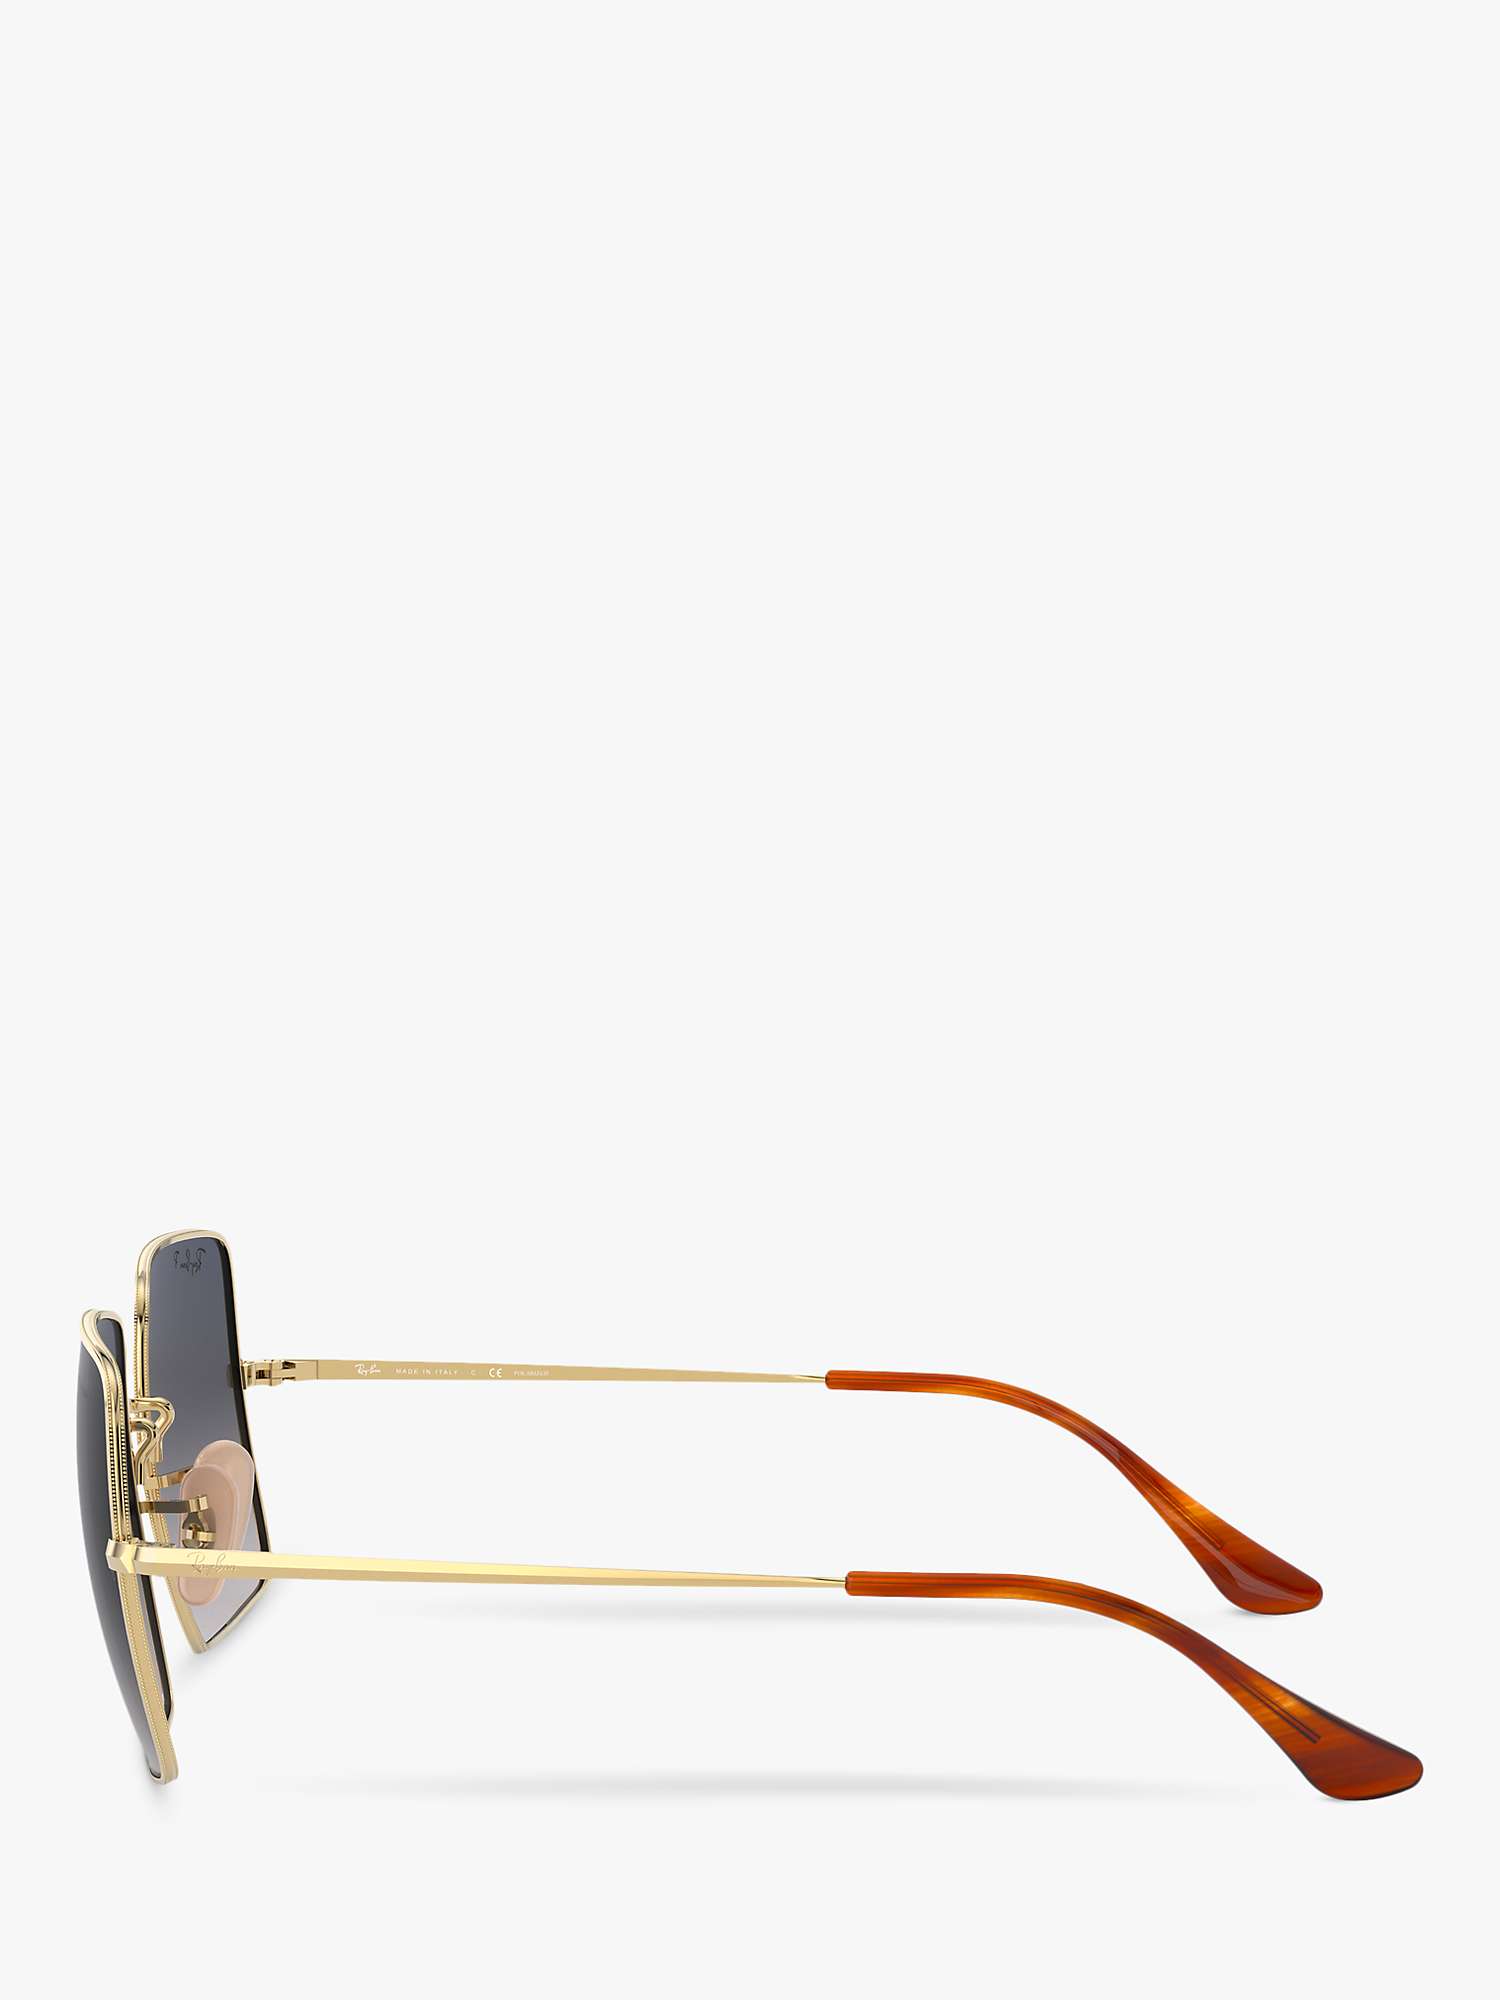 Buy Ray-Ban RB1971 Women's Square Polarised Sunglasses, Gold Online at johnlewis.com